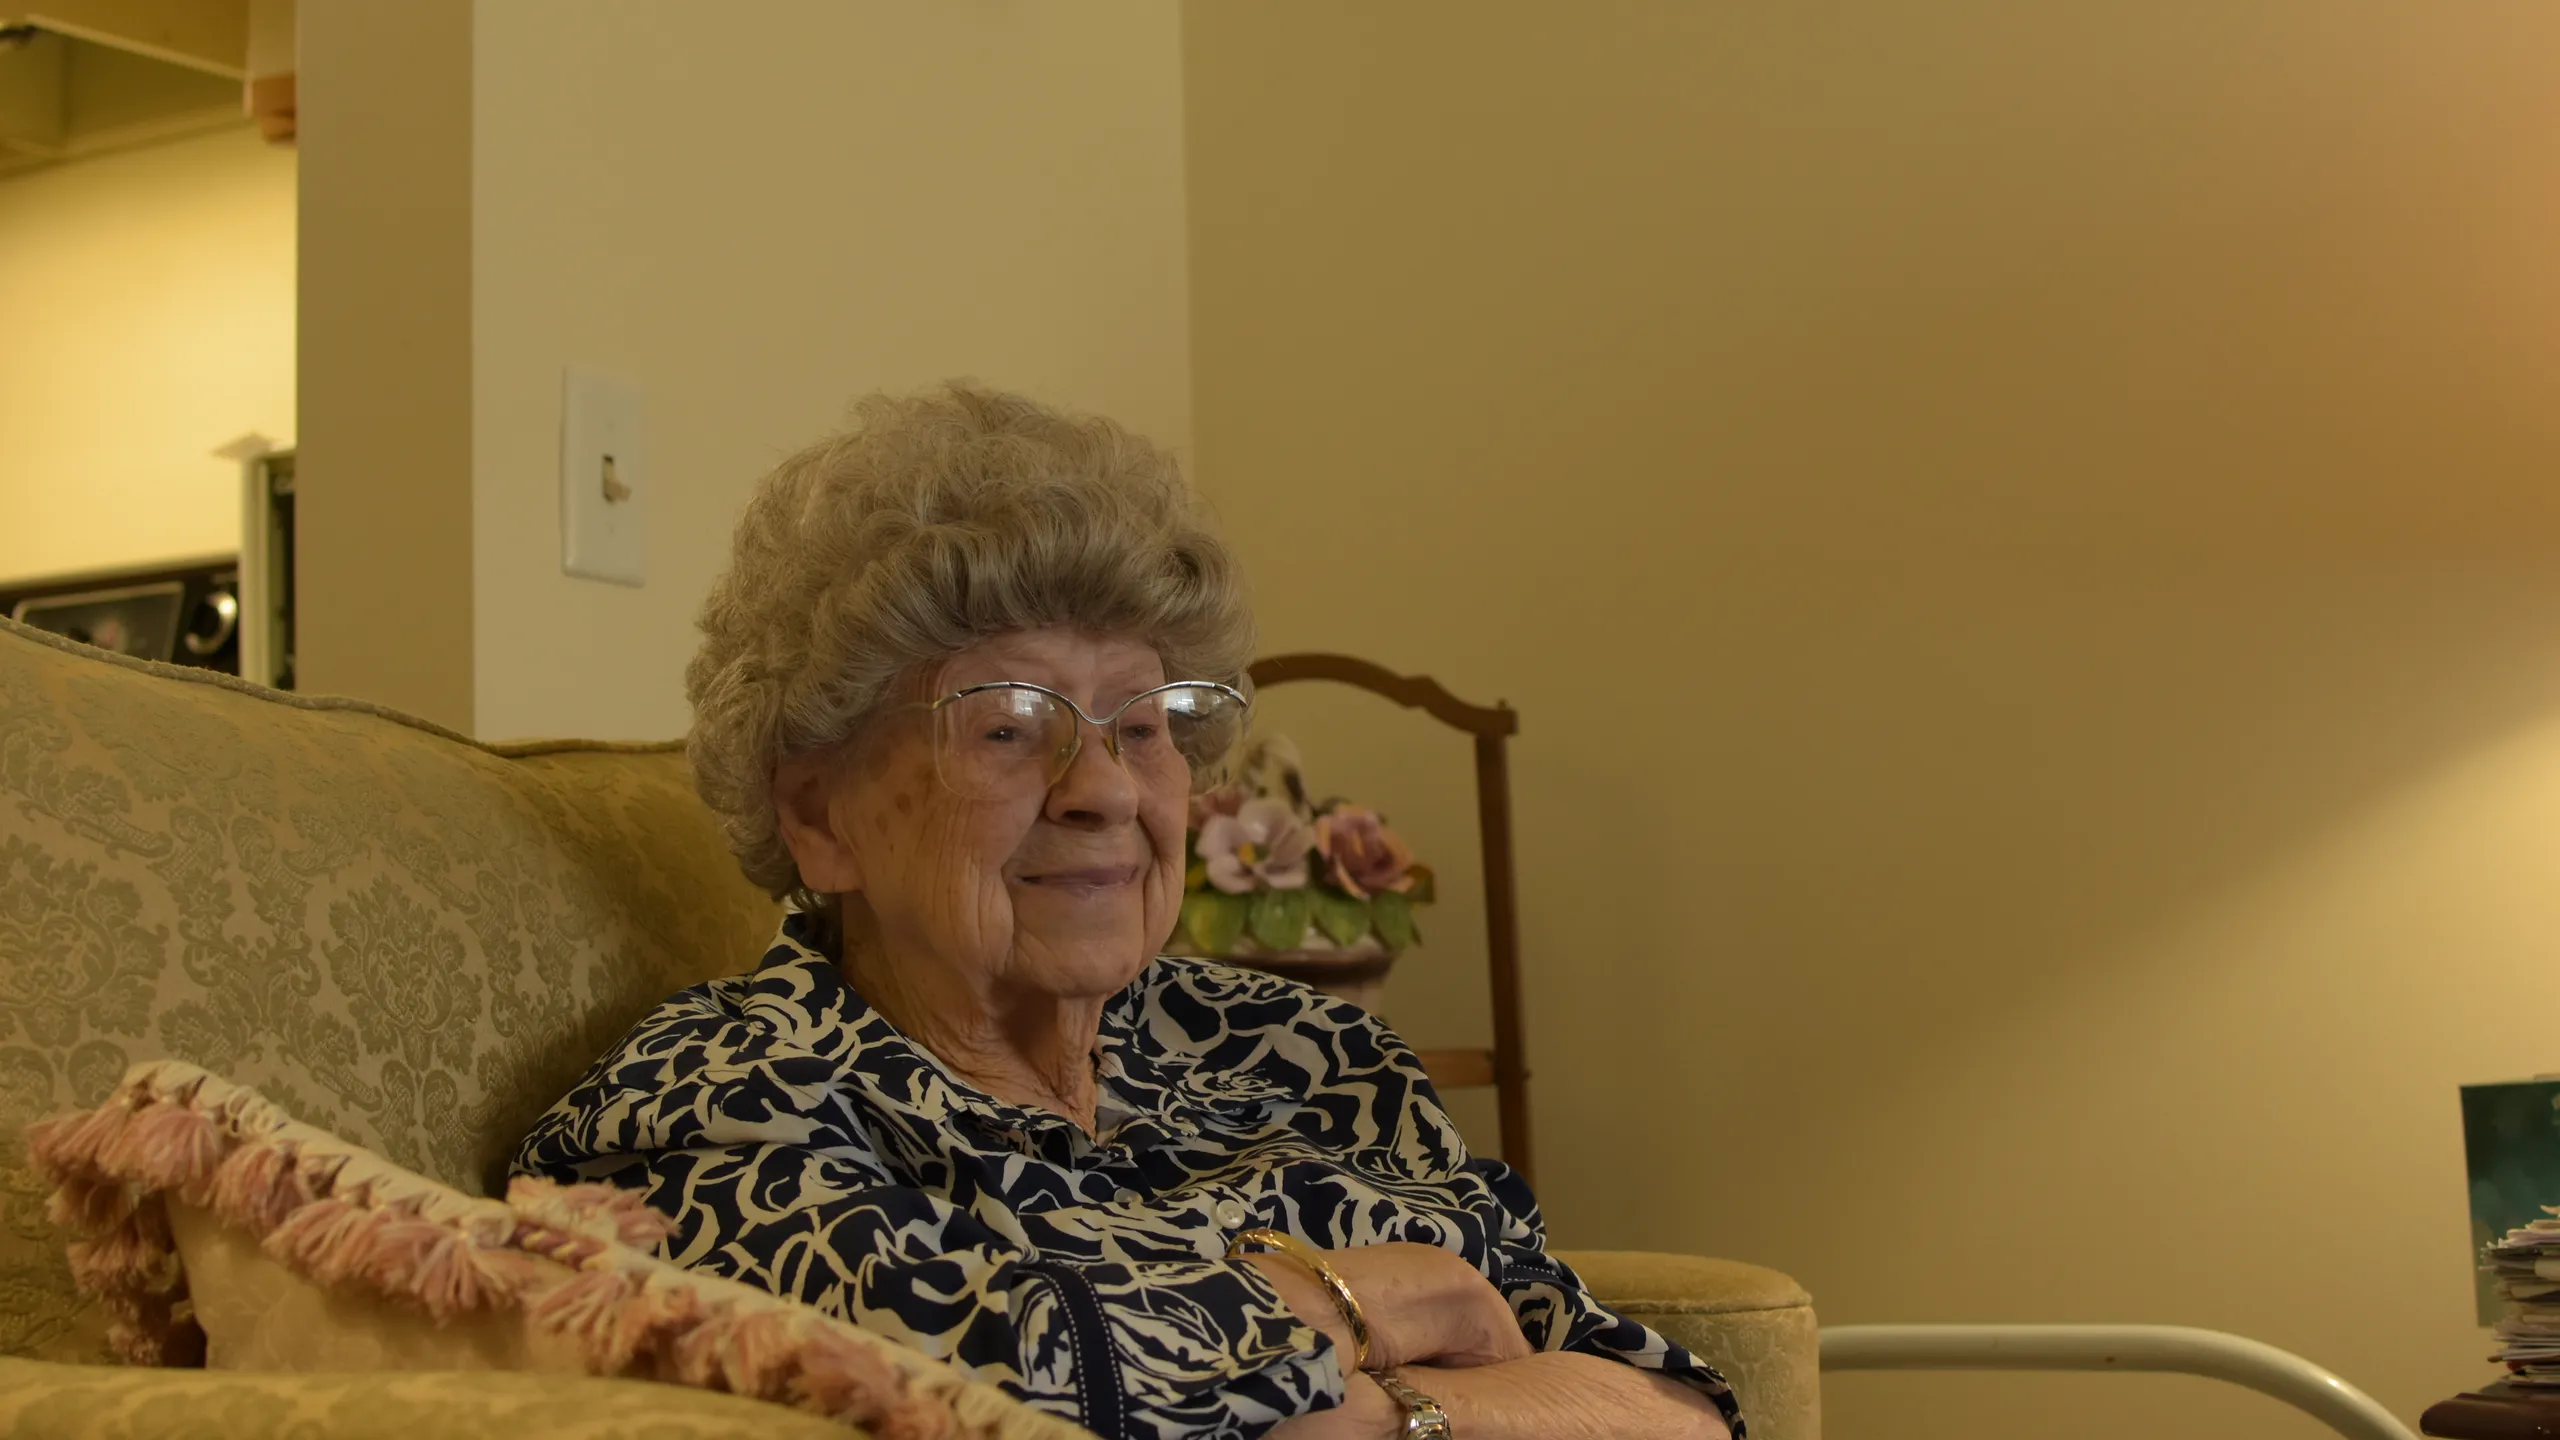 Launa Mitchell at 110 Years Old